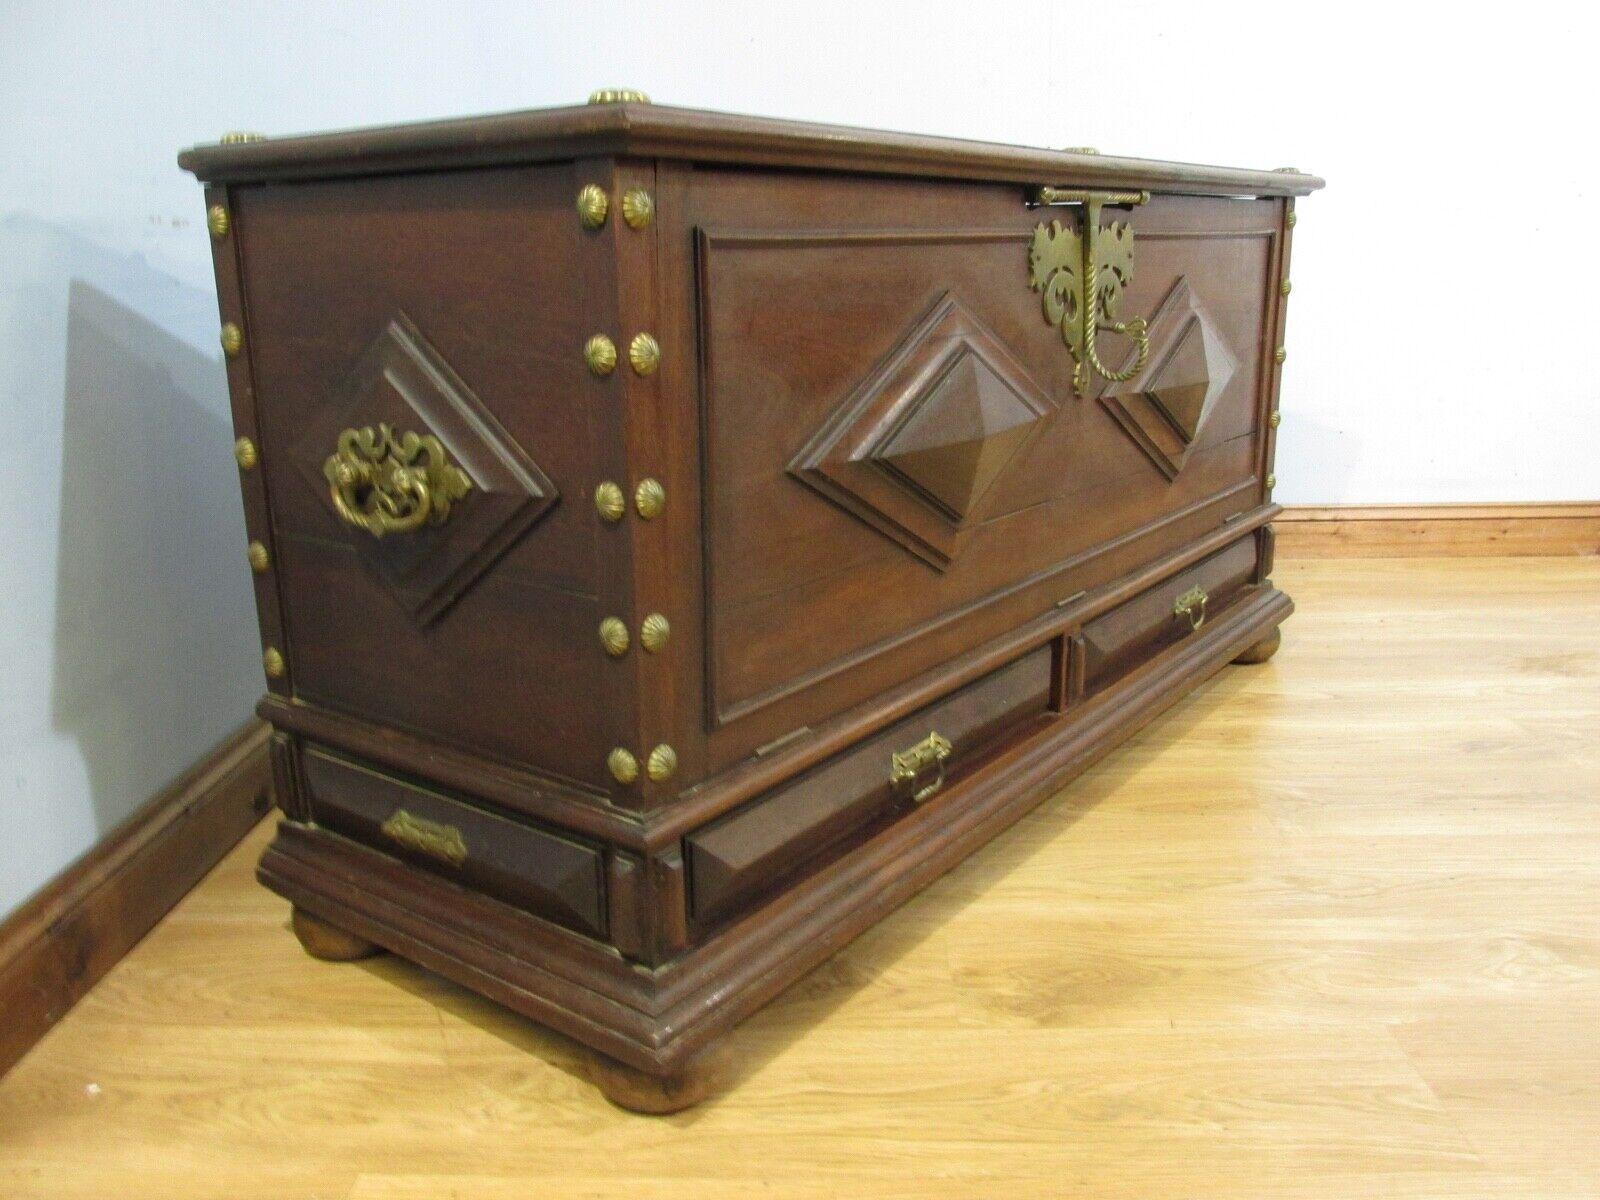 Unique antique colonial coffer trunk
Hand crafted from padauk with brass fixtures
Great the way it opens up completely including the side panel folding down
Bought from a private residenc in London's Belsize Park
Offered in great shape ready for